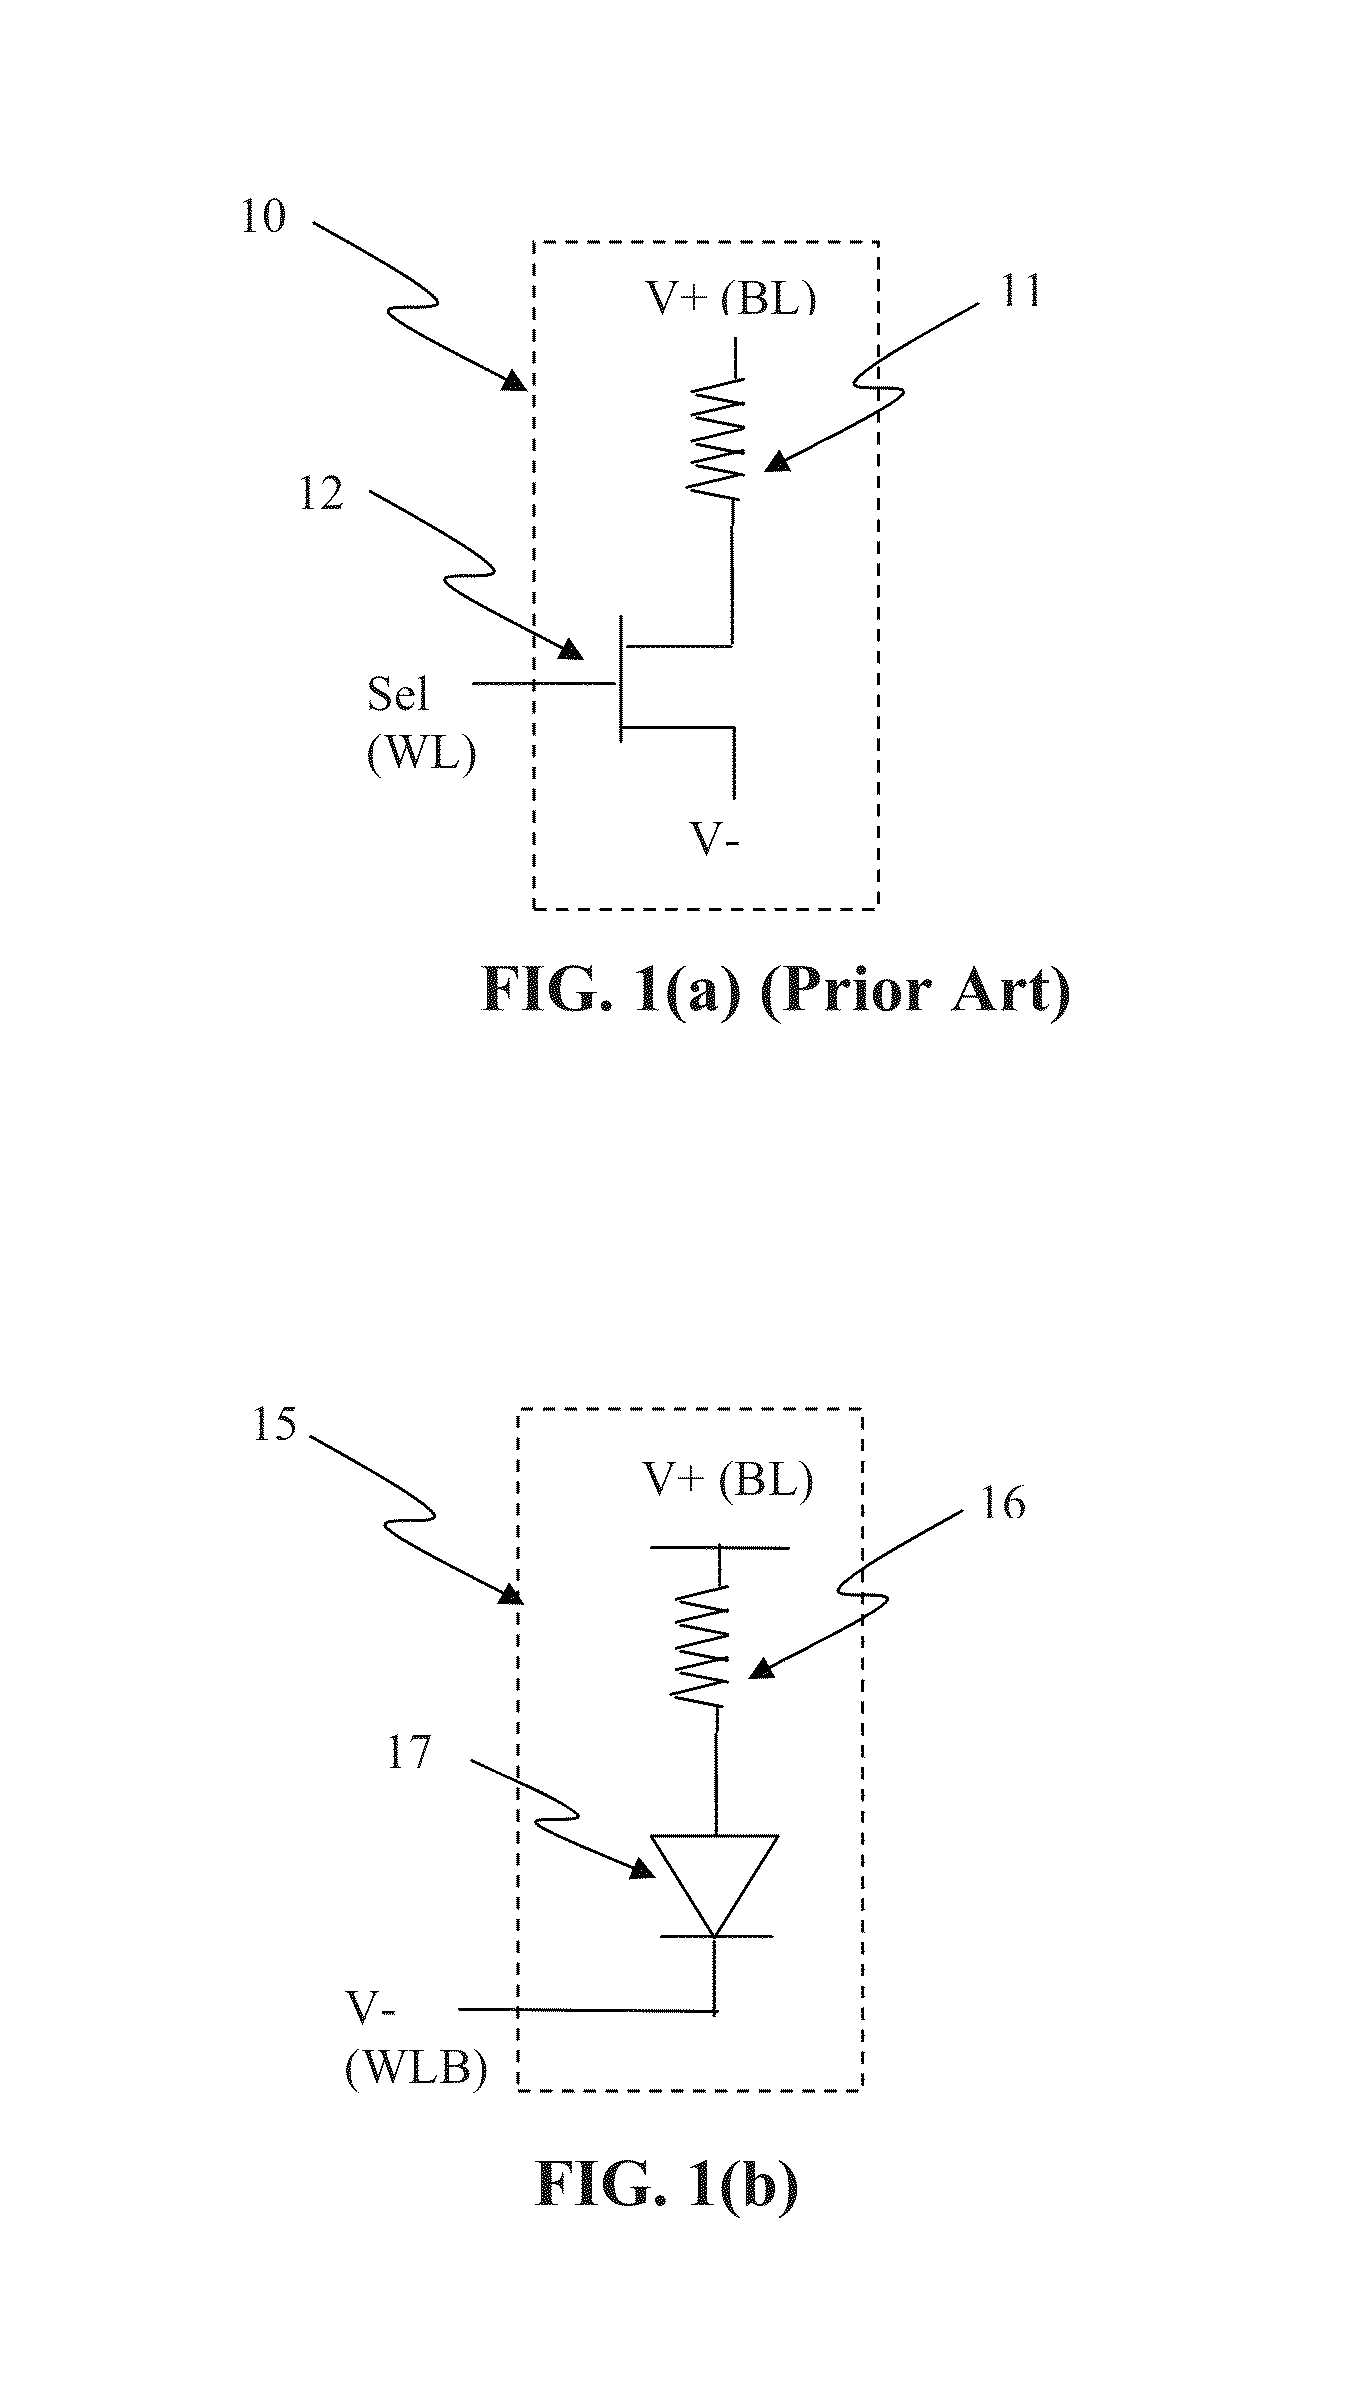 Circuit and system of using FinFET for building programmable resistive devices